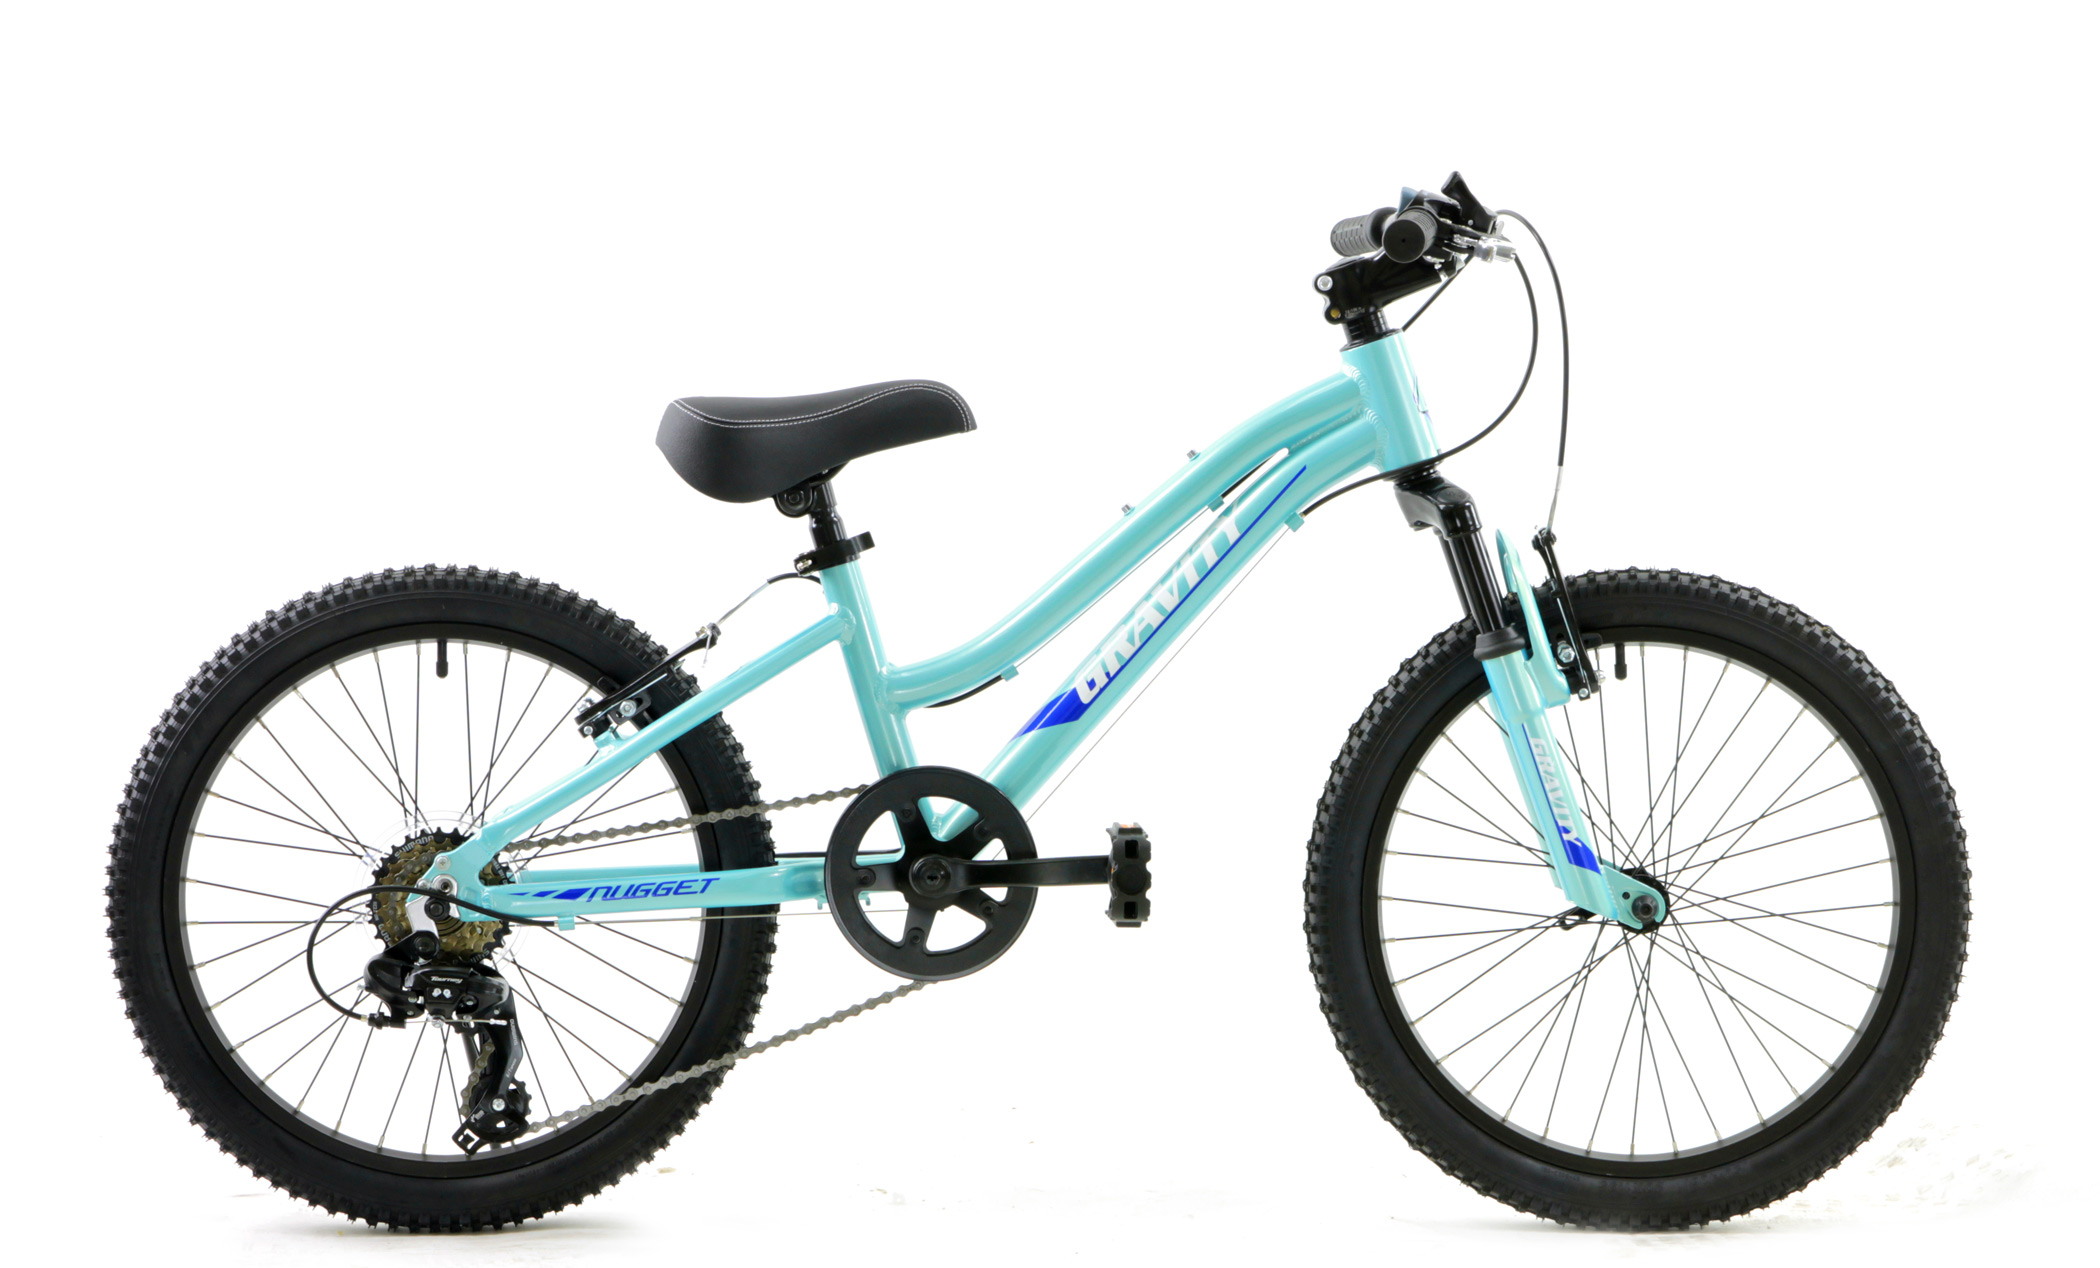 Bikes Gravity Nugget 20 Shimano Multi Speed Front Suspension Kids Mountain Bikes for Lil' Riders Image